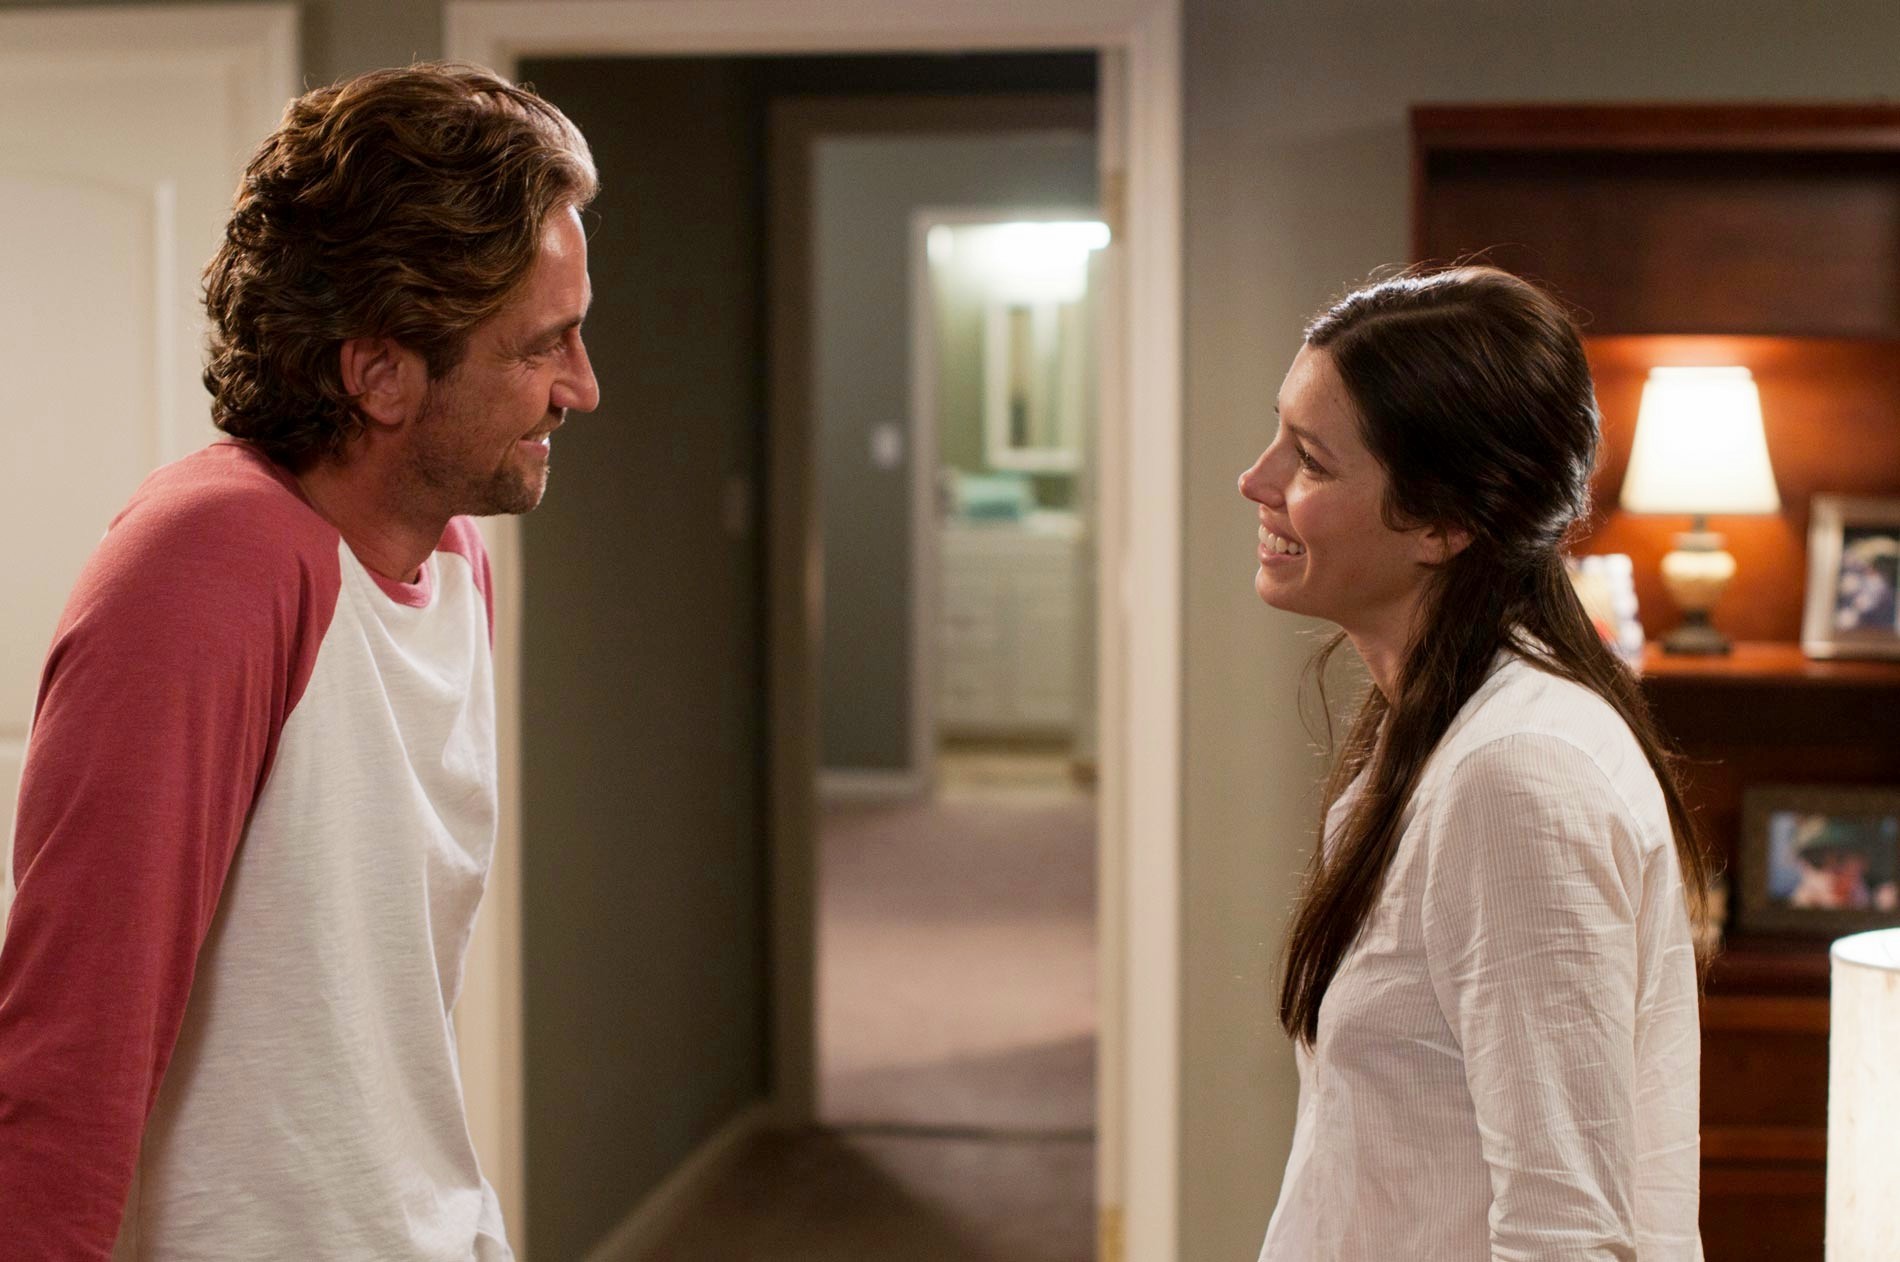 Gerard Butler stars as George and Jessica Biel stars as Stacie in FilmDistrict's Playing for Keeps (2012)